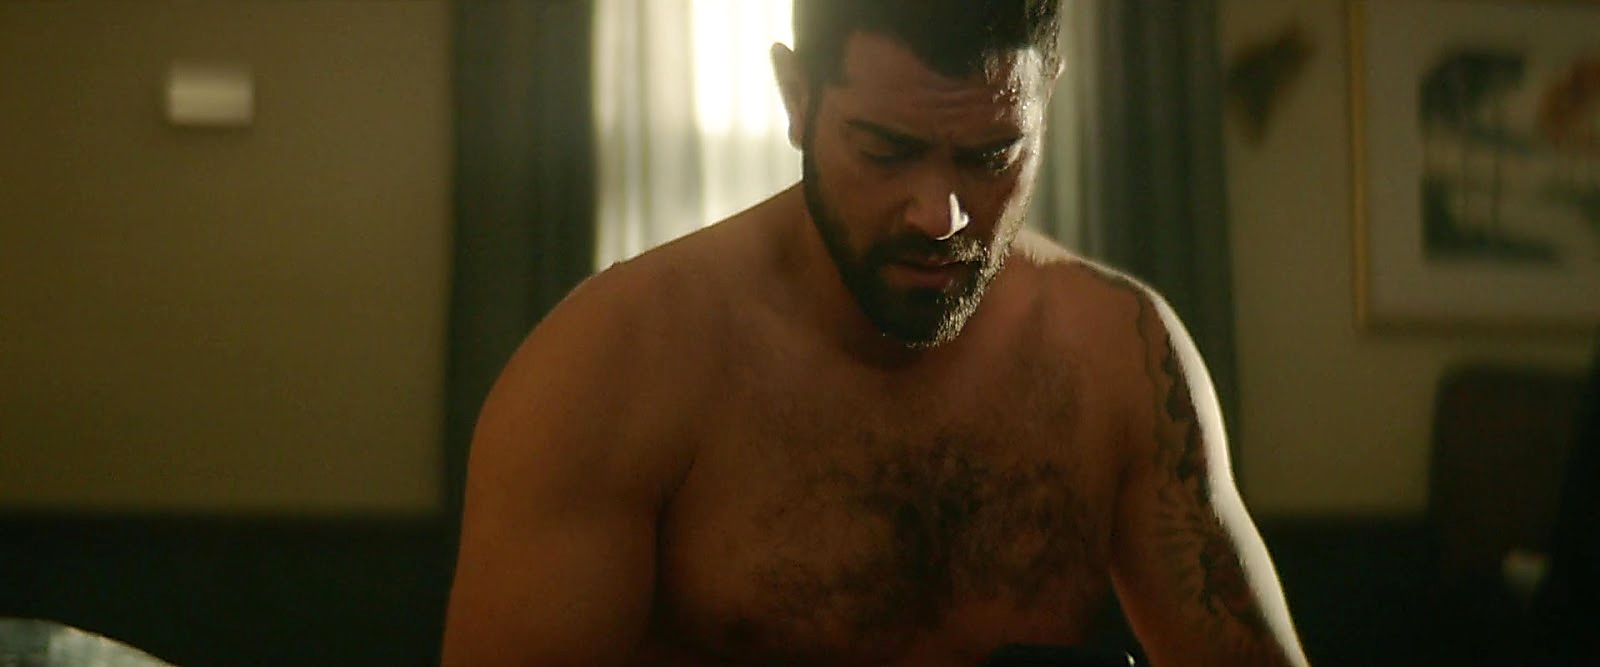 Jesse Metcalfe sexy shirtless scene August 25, 2020, 10am